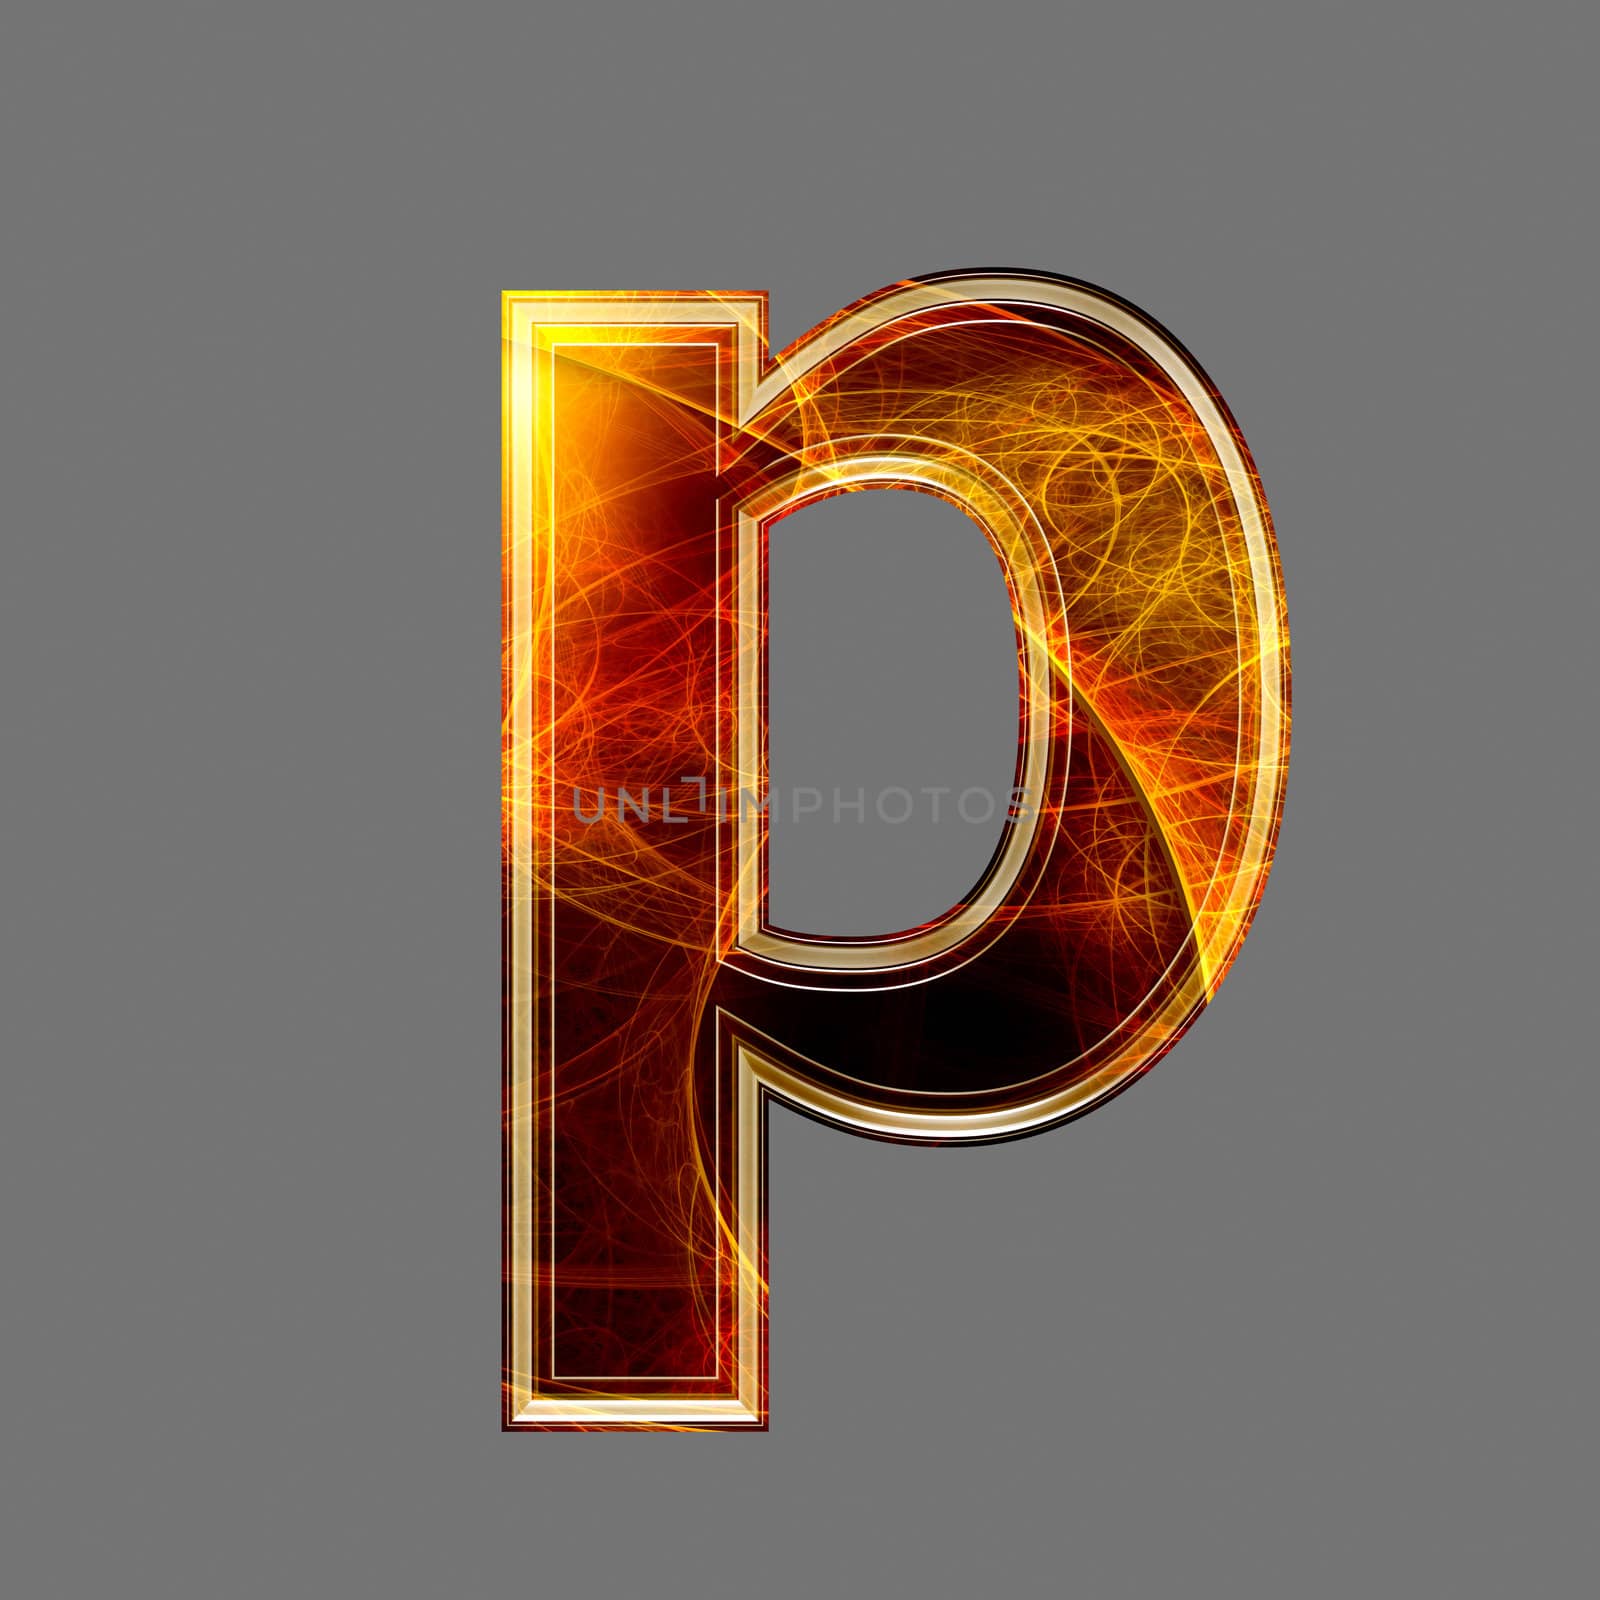 3d abstract and futuristic letter - P by chrisroll